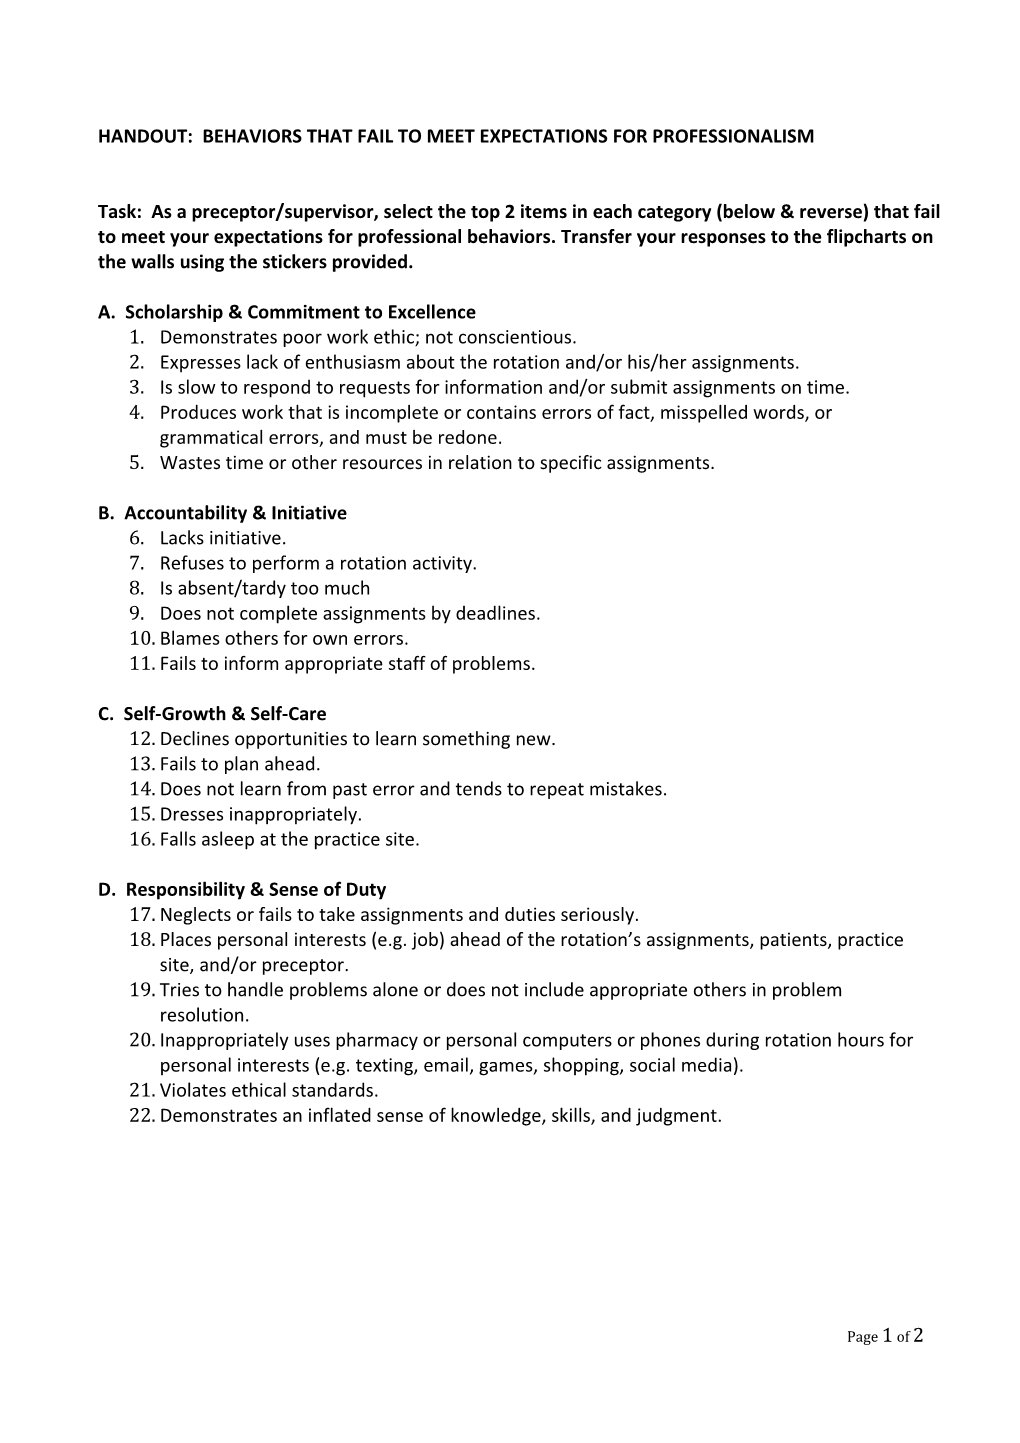 Handout: Behaviors That Fail to Meet Expectations for Professionalism